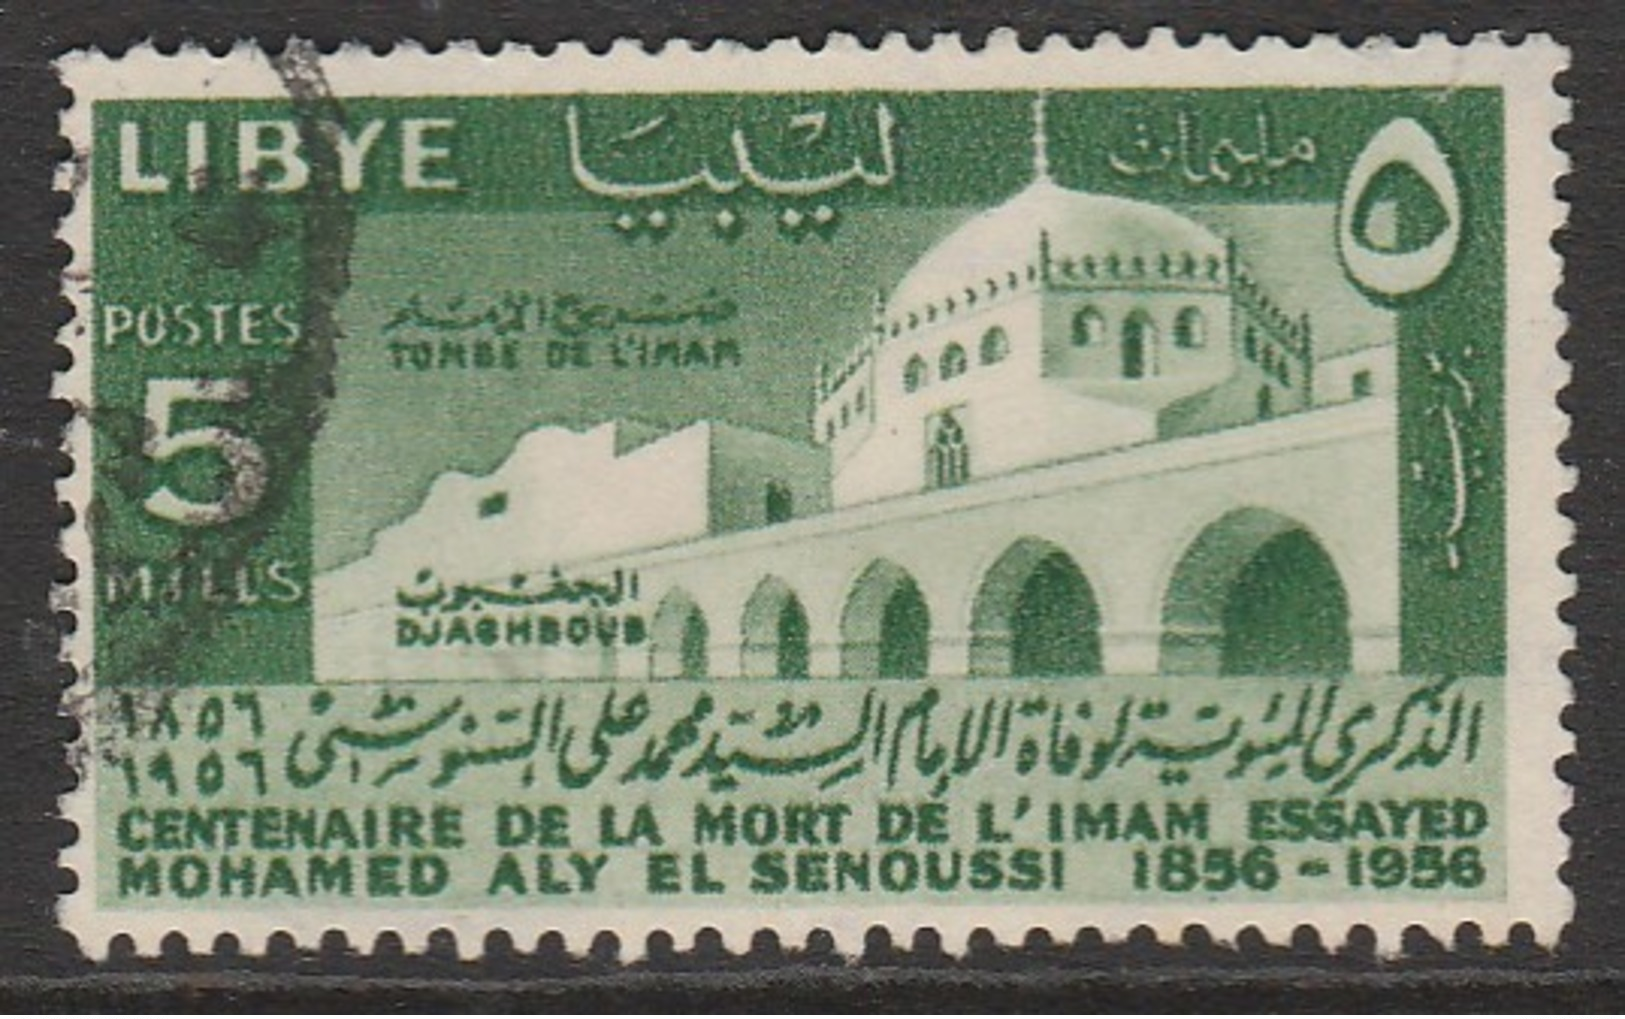 Libya 1956 The 100th Anniversary Of The Death Of Imam Essayed Mohamed Aly El Senussi 5 M Green SW 71 O Used - Libya